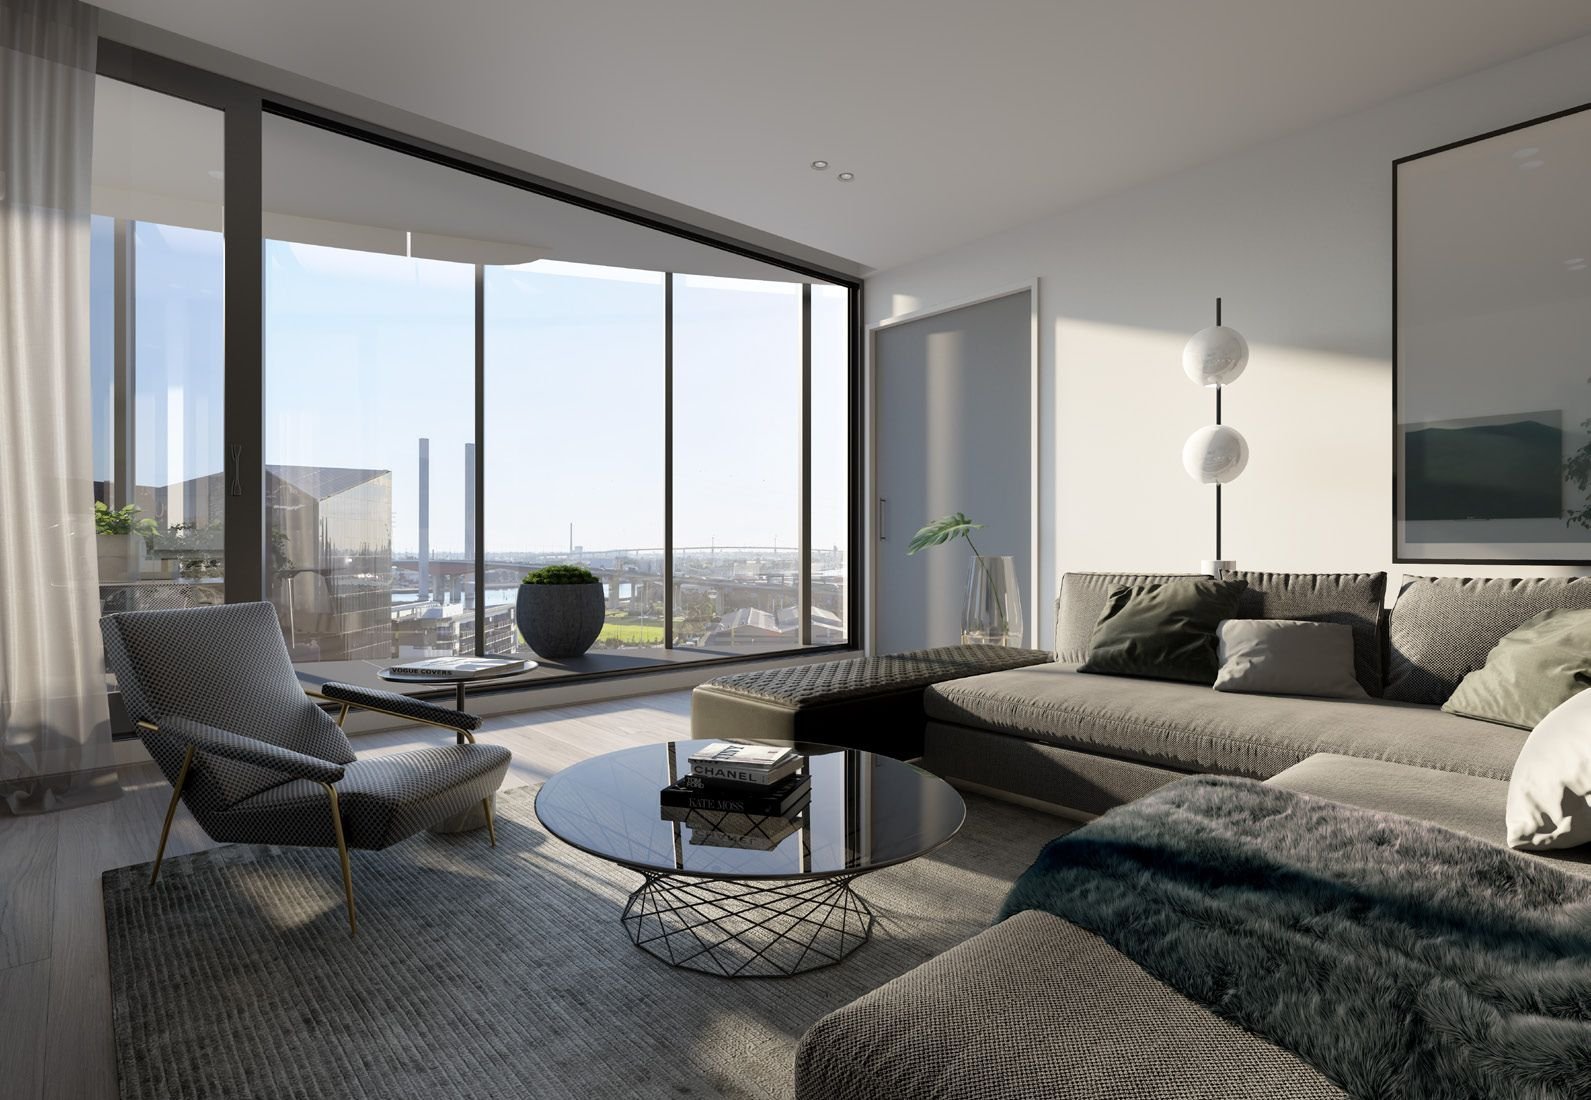 The Docklands Residences - 3-43 Waterfront Way, Docklands VIC 3008  - Townly - 8.jpg